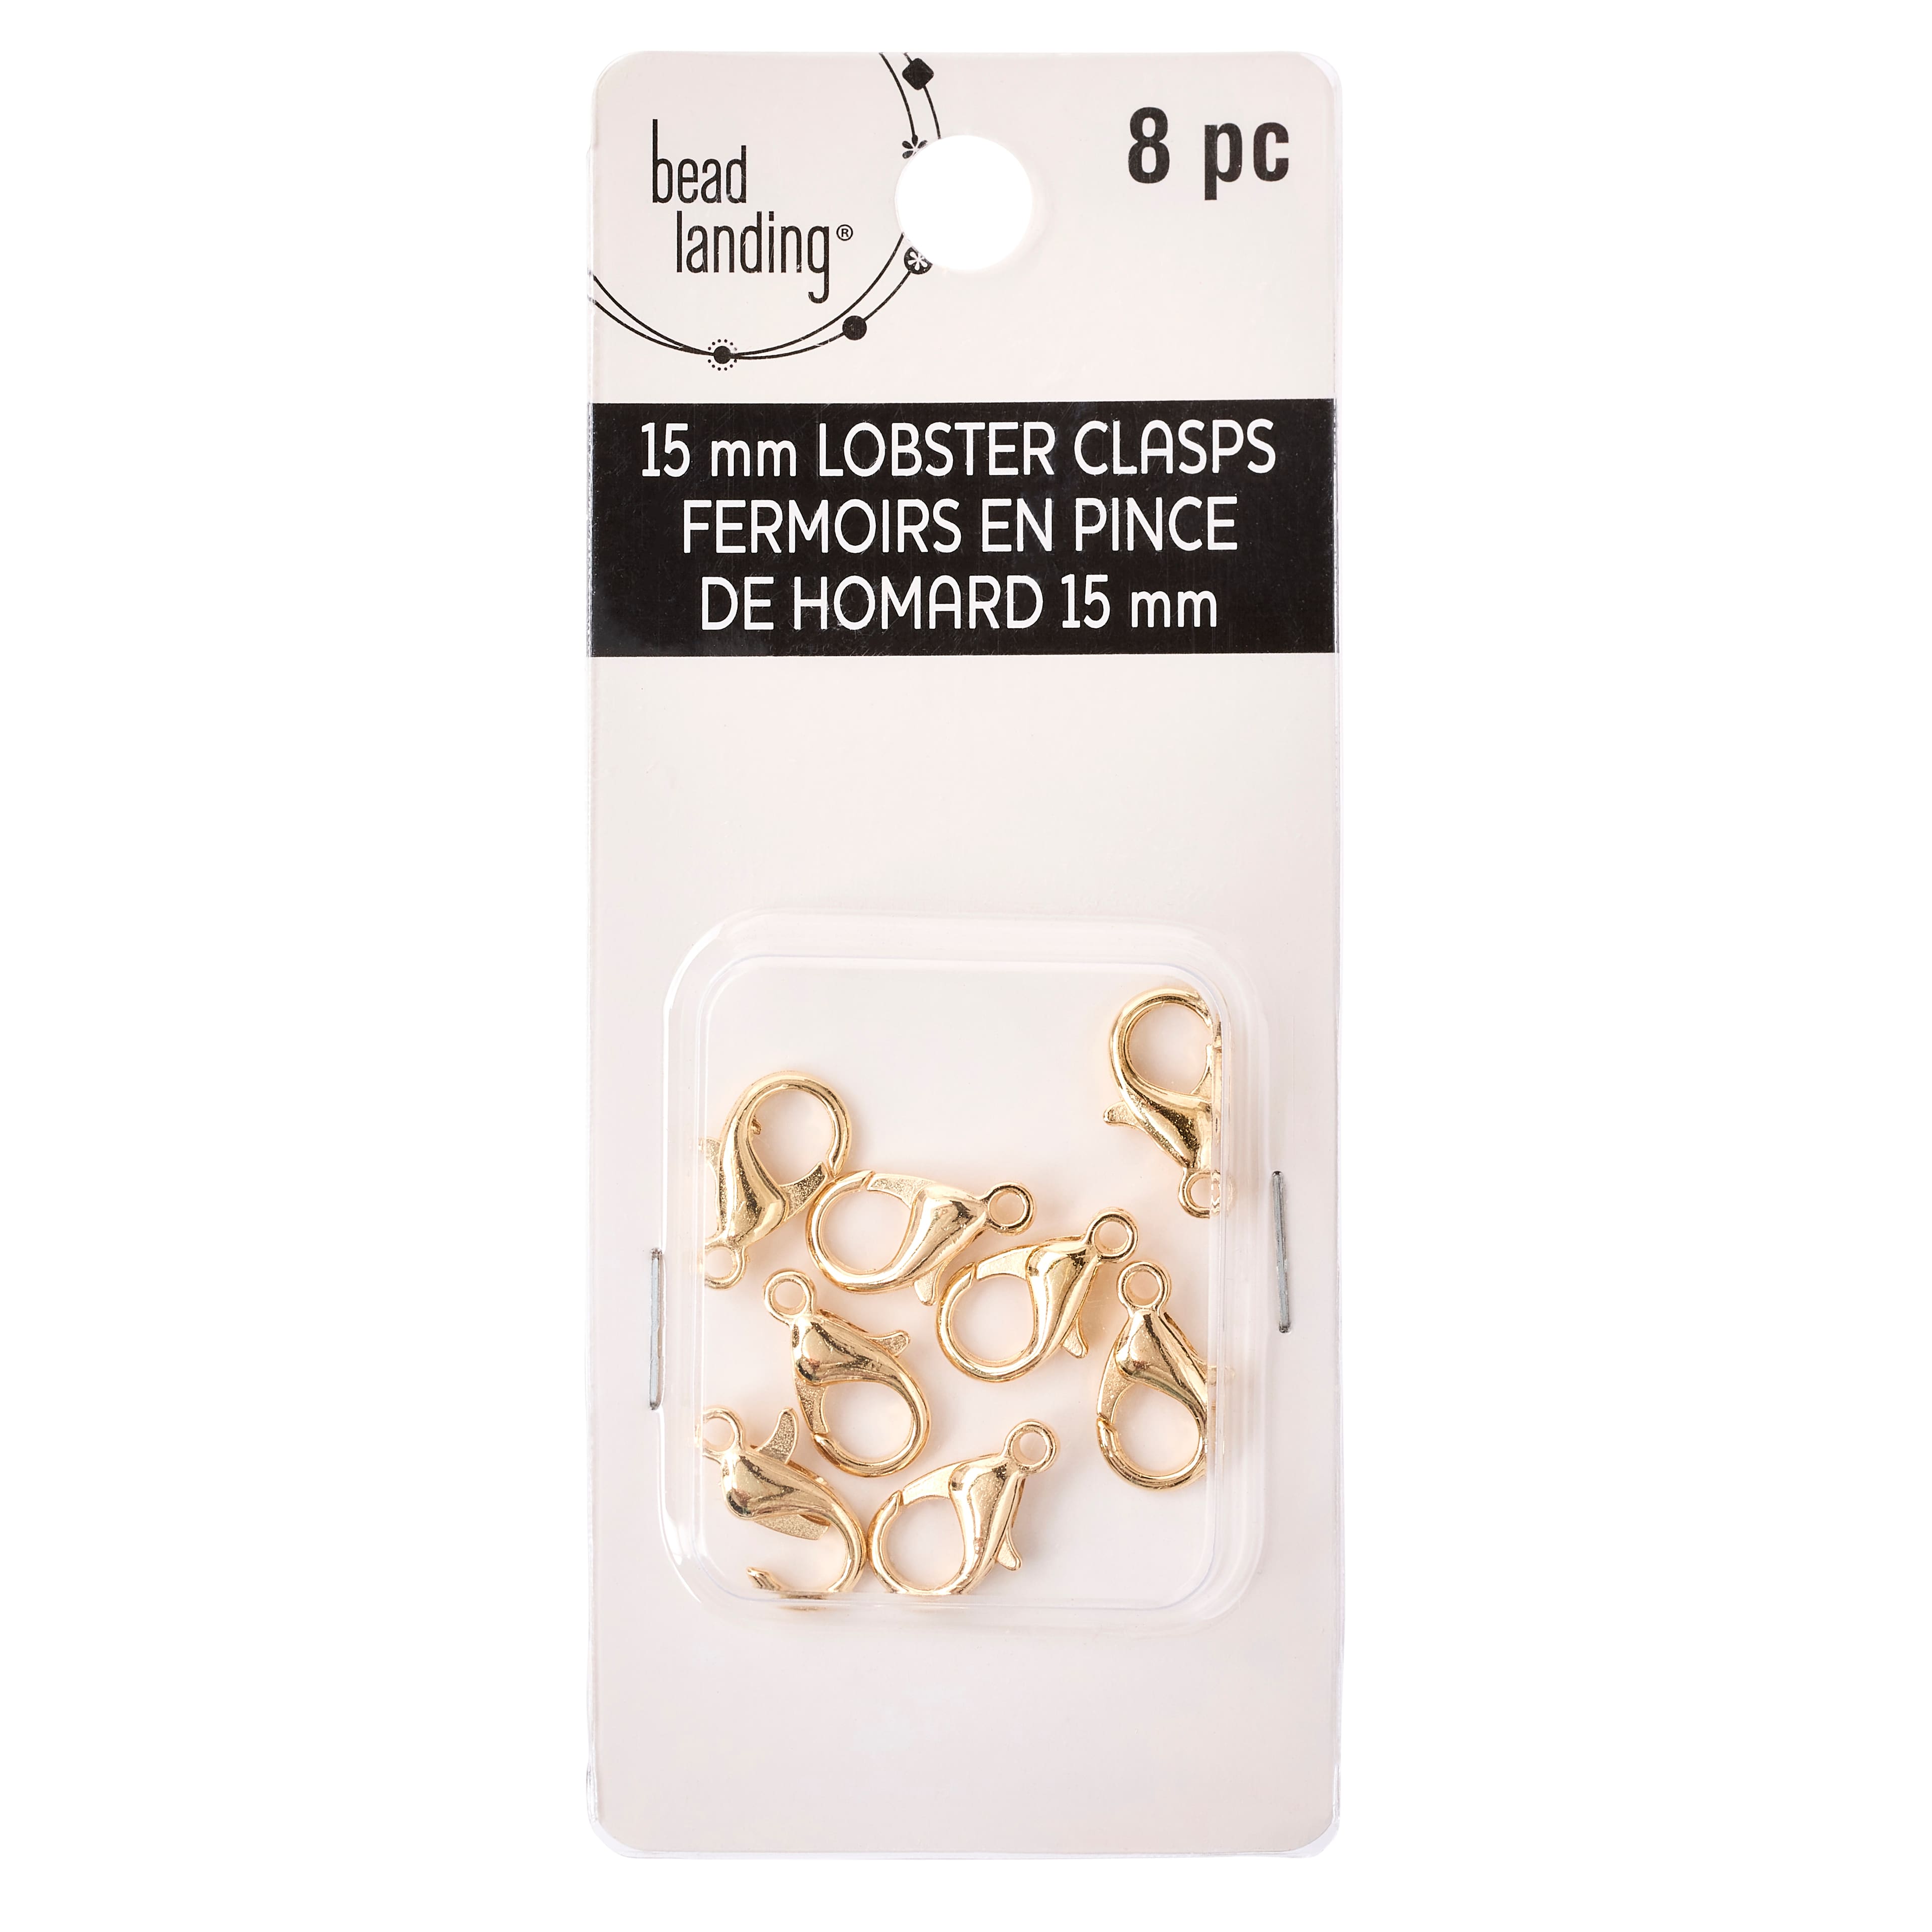 22mm Shiny Gold Swivel Lobster Claw Clasp - Pack of 2 – Beads, Inc.